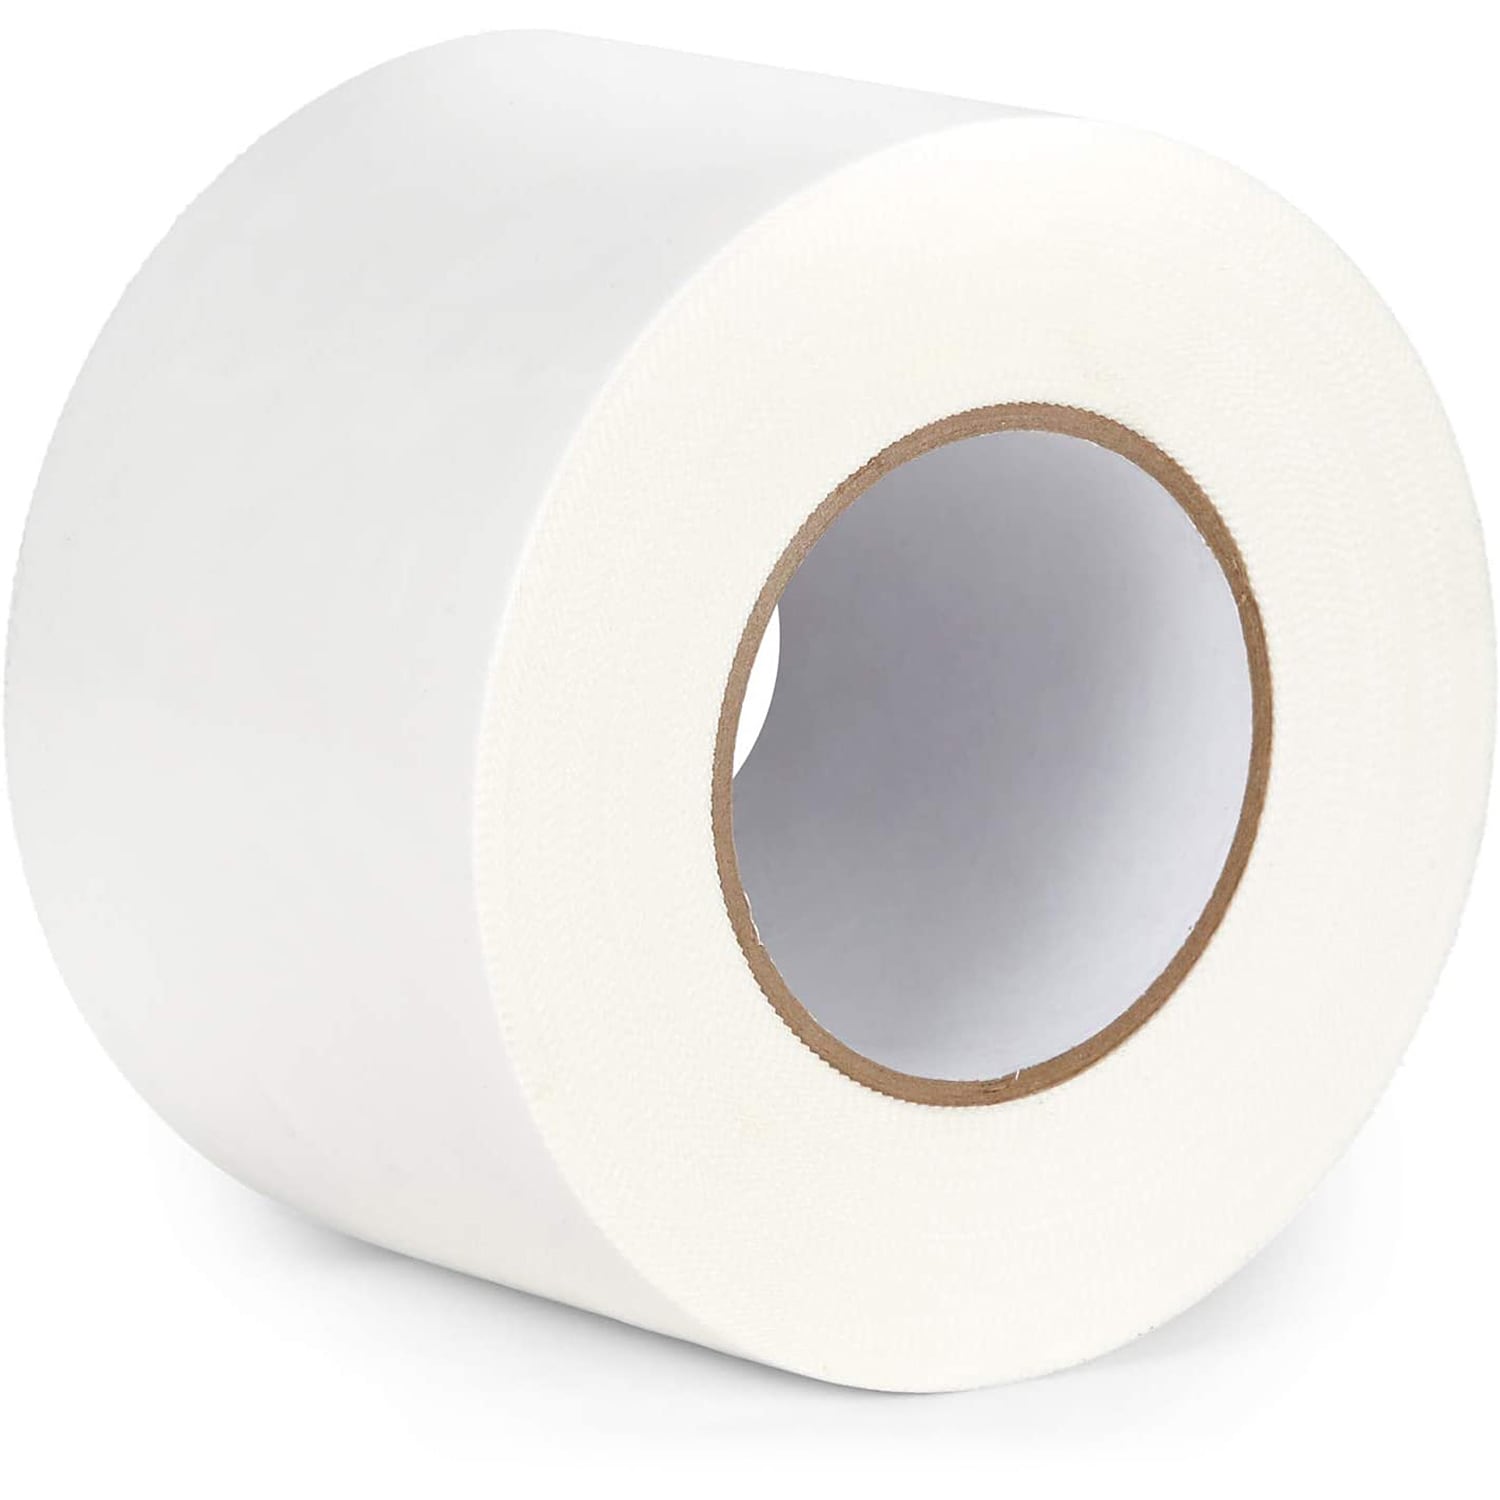 PE Surface Protection Film - Value Grade - 90 Day UV - Electro Tape